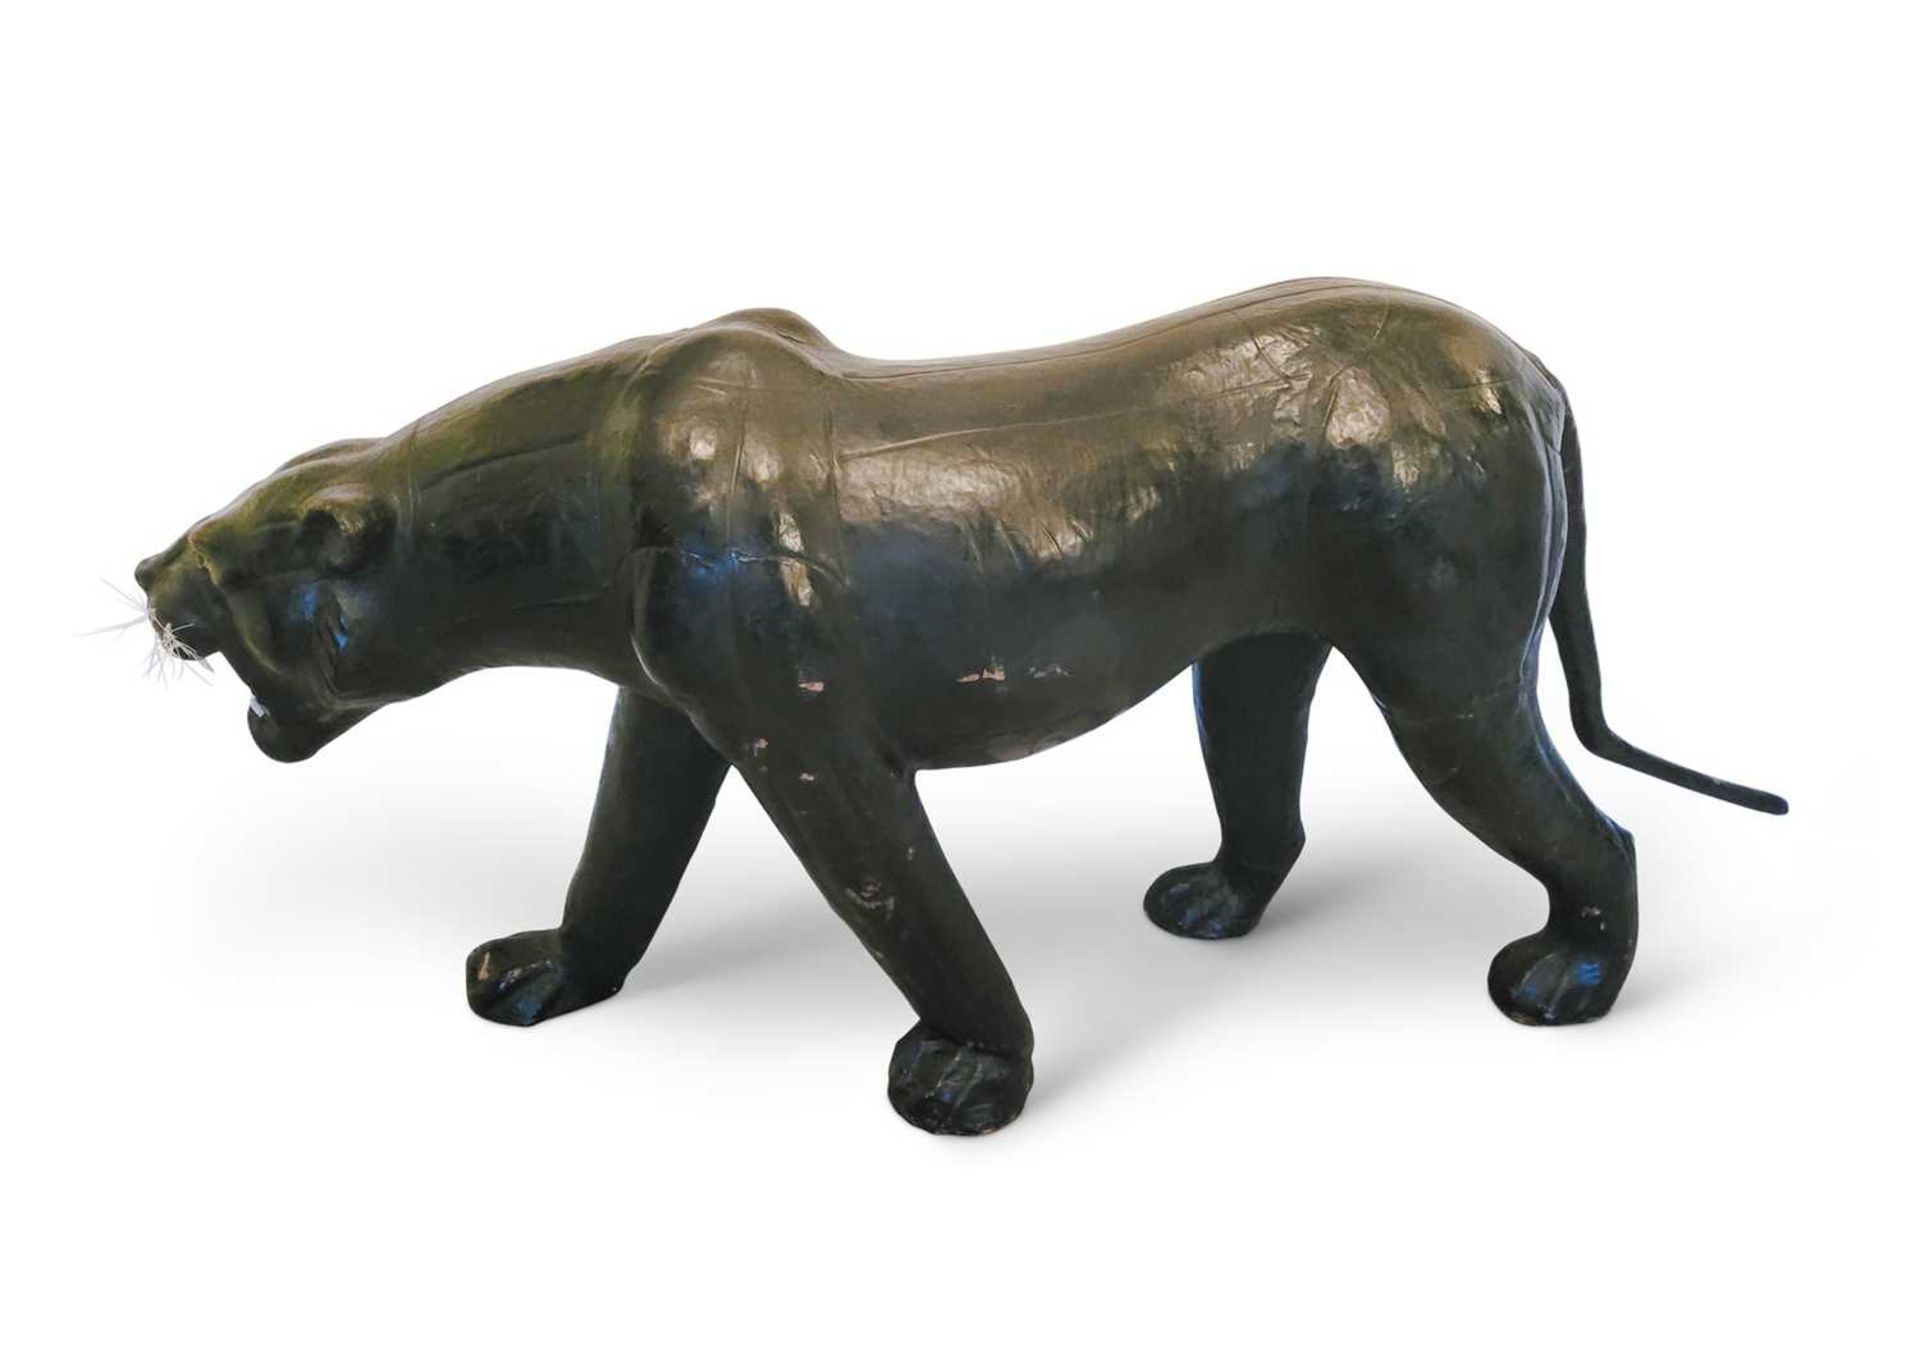 A VERY LARGE LEATHER PANTHER IN THE STYLE OF LIBERTY'S OF LONDON